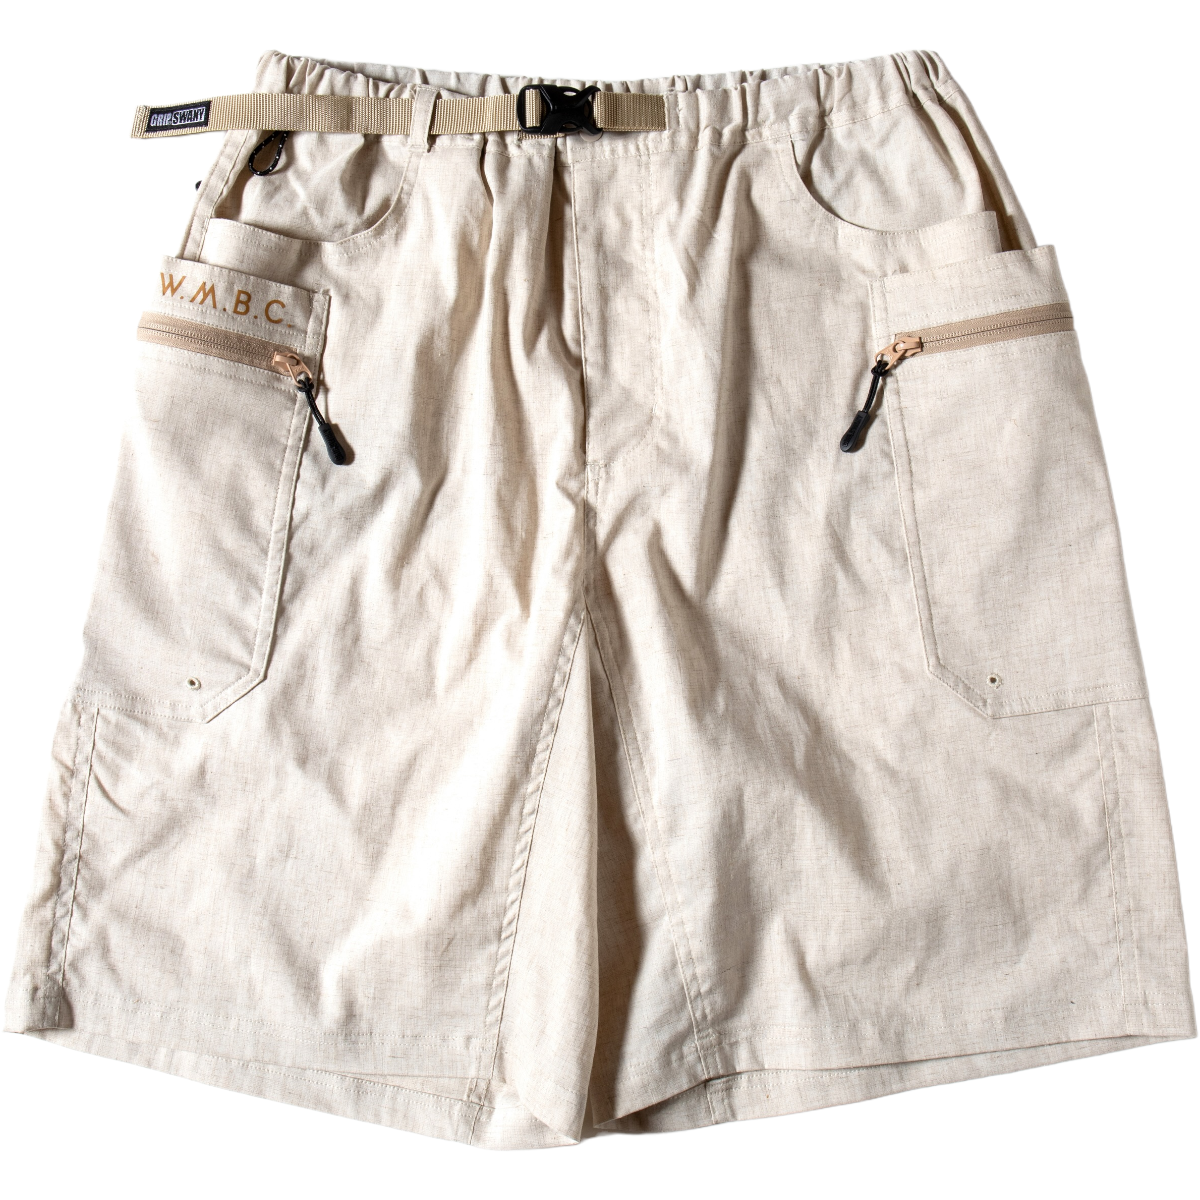 White Mountaineering<BR>WM X GRIPSWANY 'GEAR SHORTS'(IVORY)